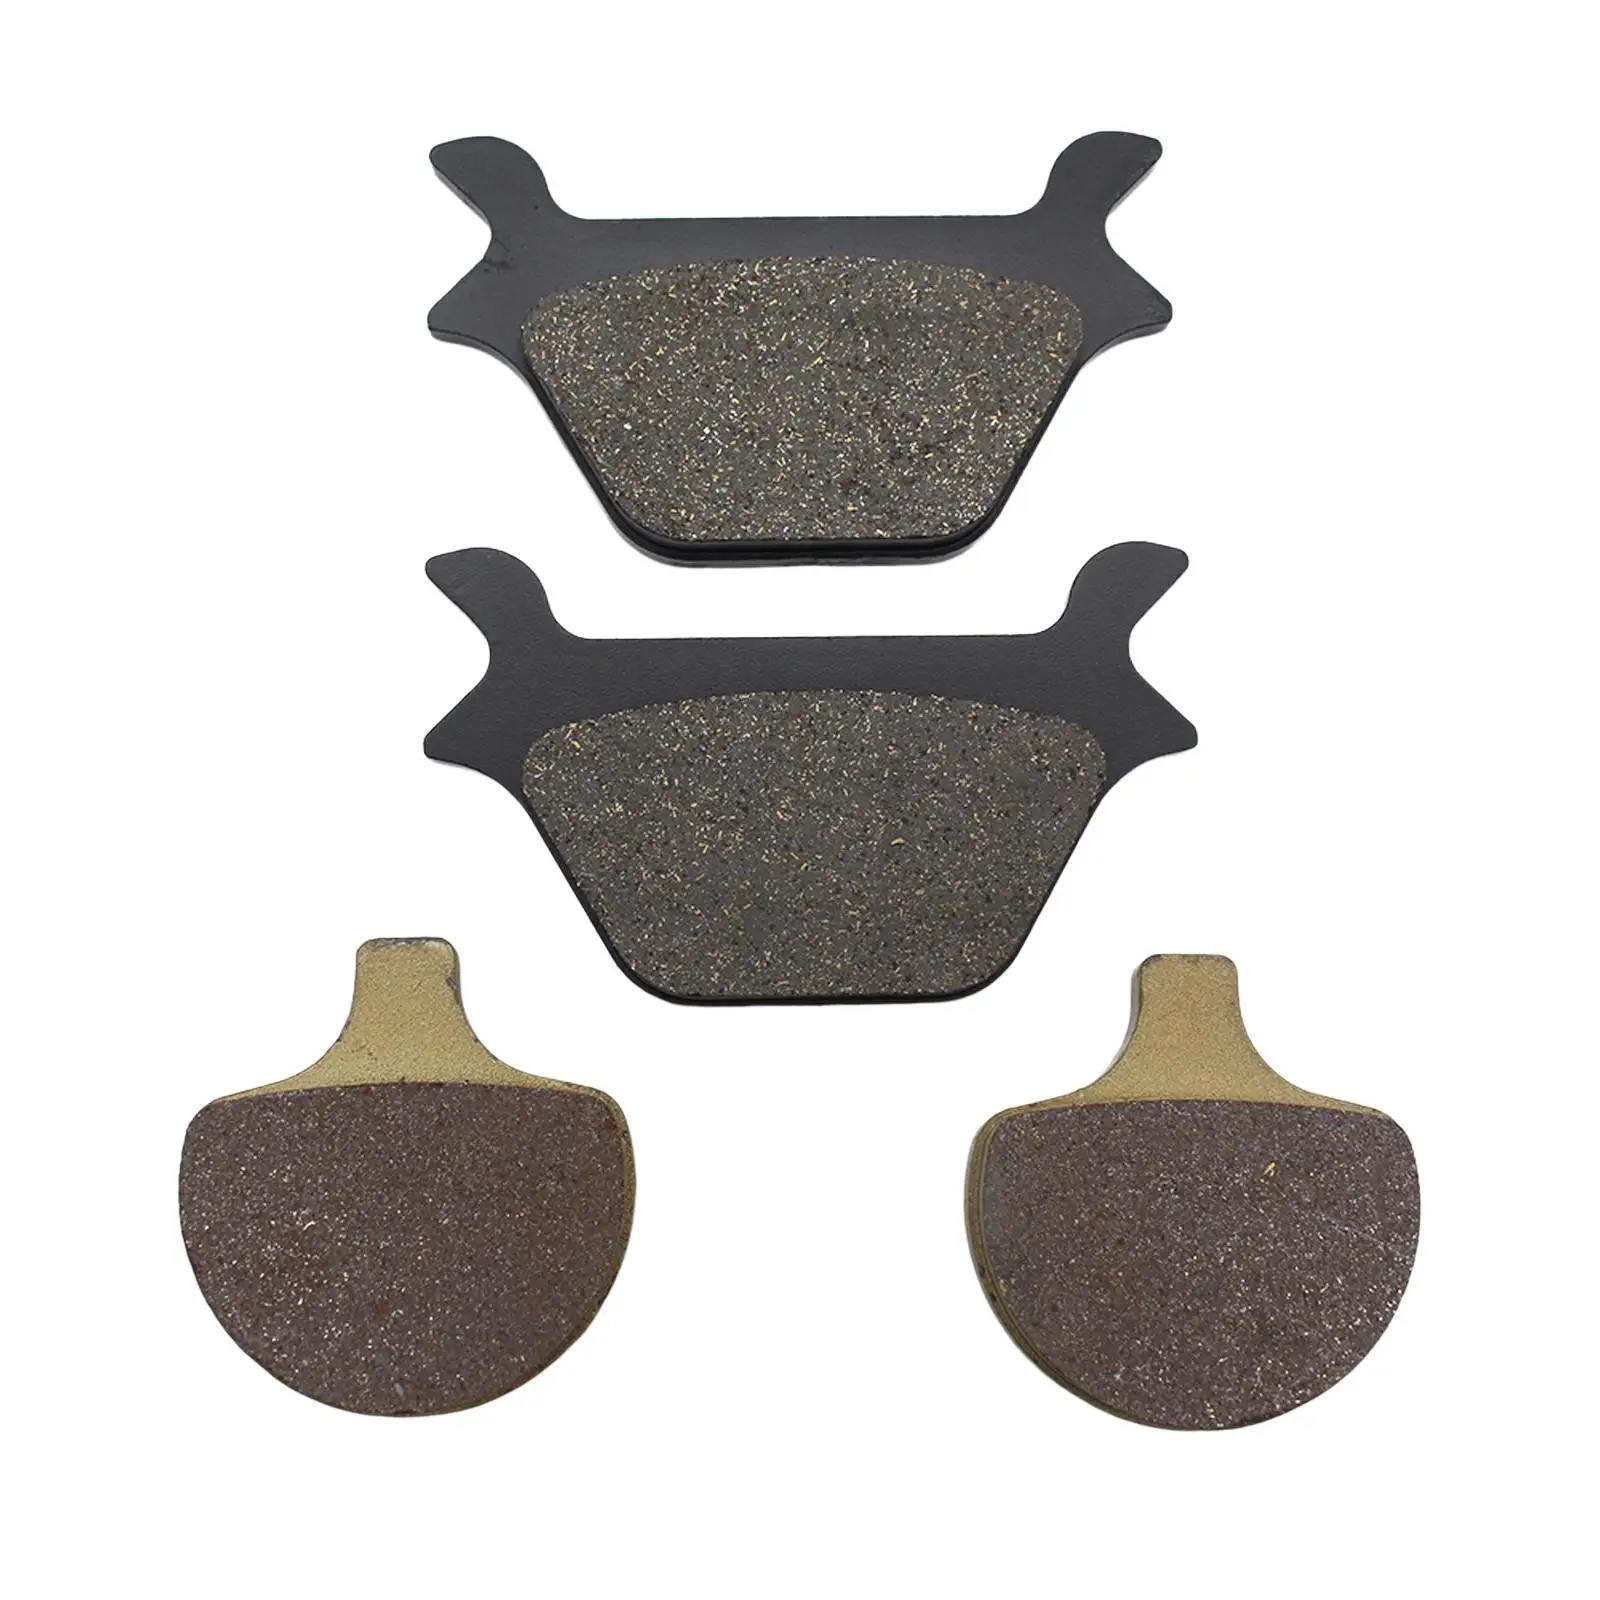 4 Pieces Front Rear Brake Pads Professional High Strength for Softail Springer